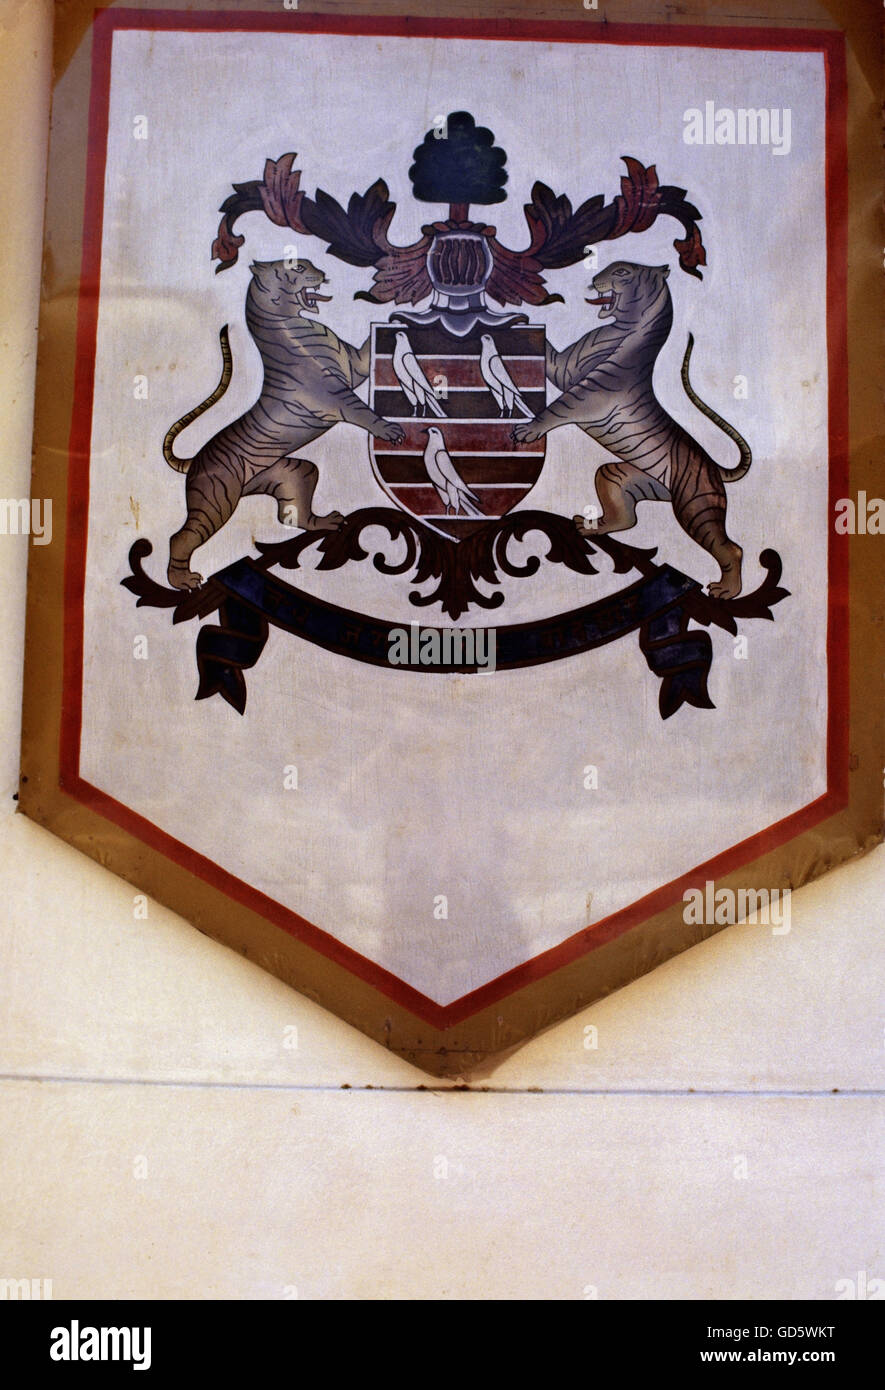 Royal Coat of Arms Stock Photo